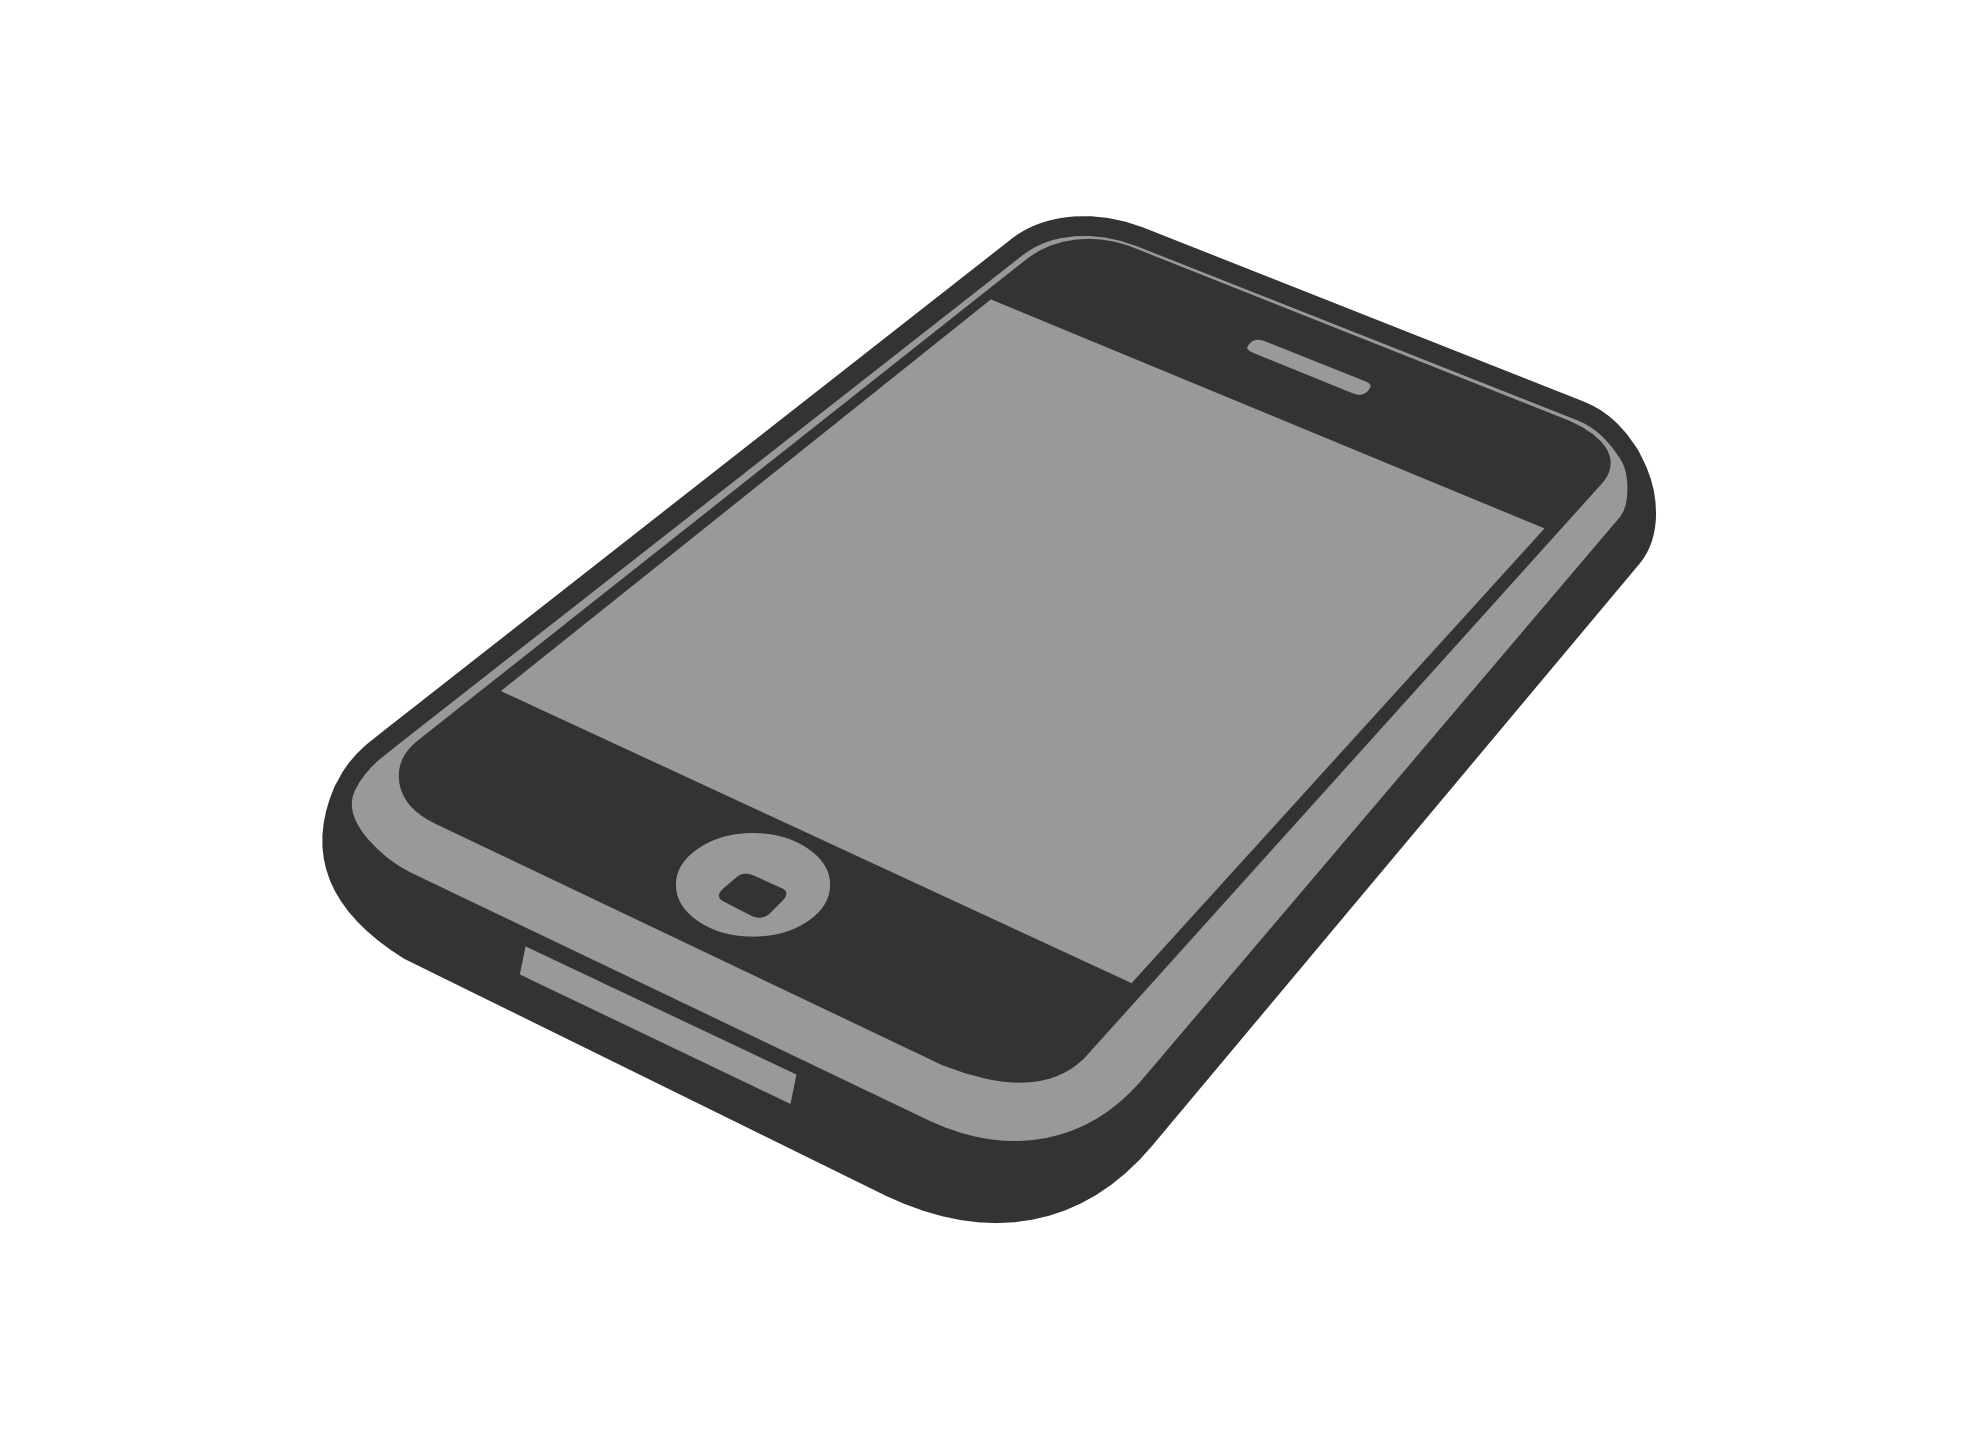 iphone clipart - photo #36